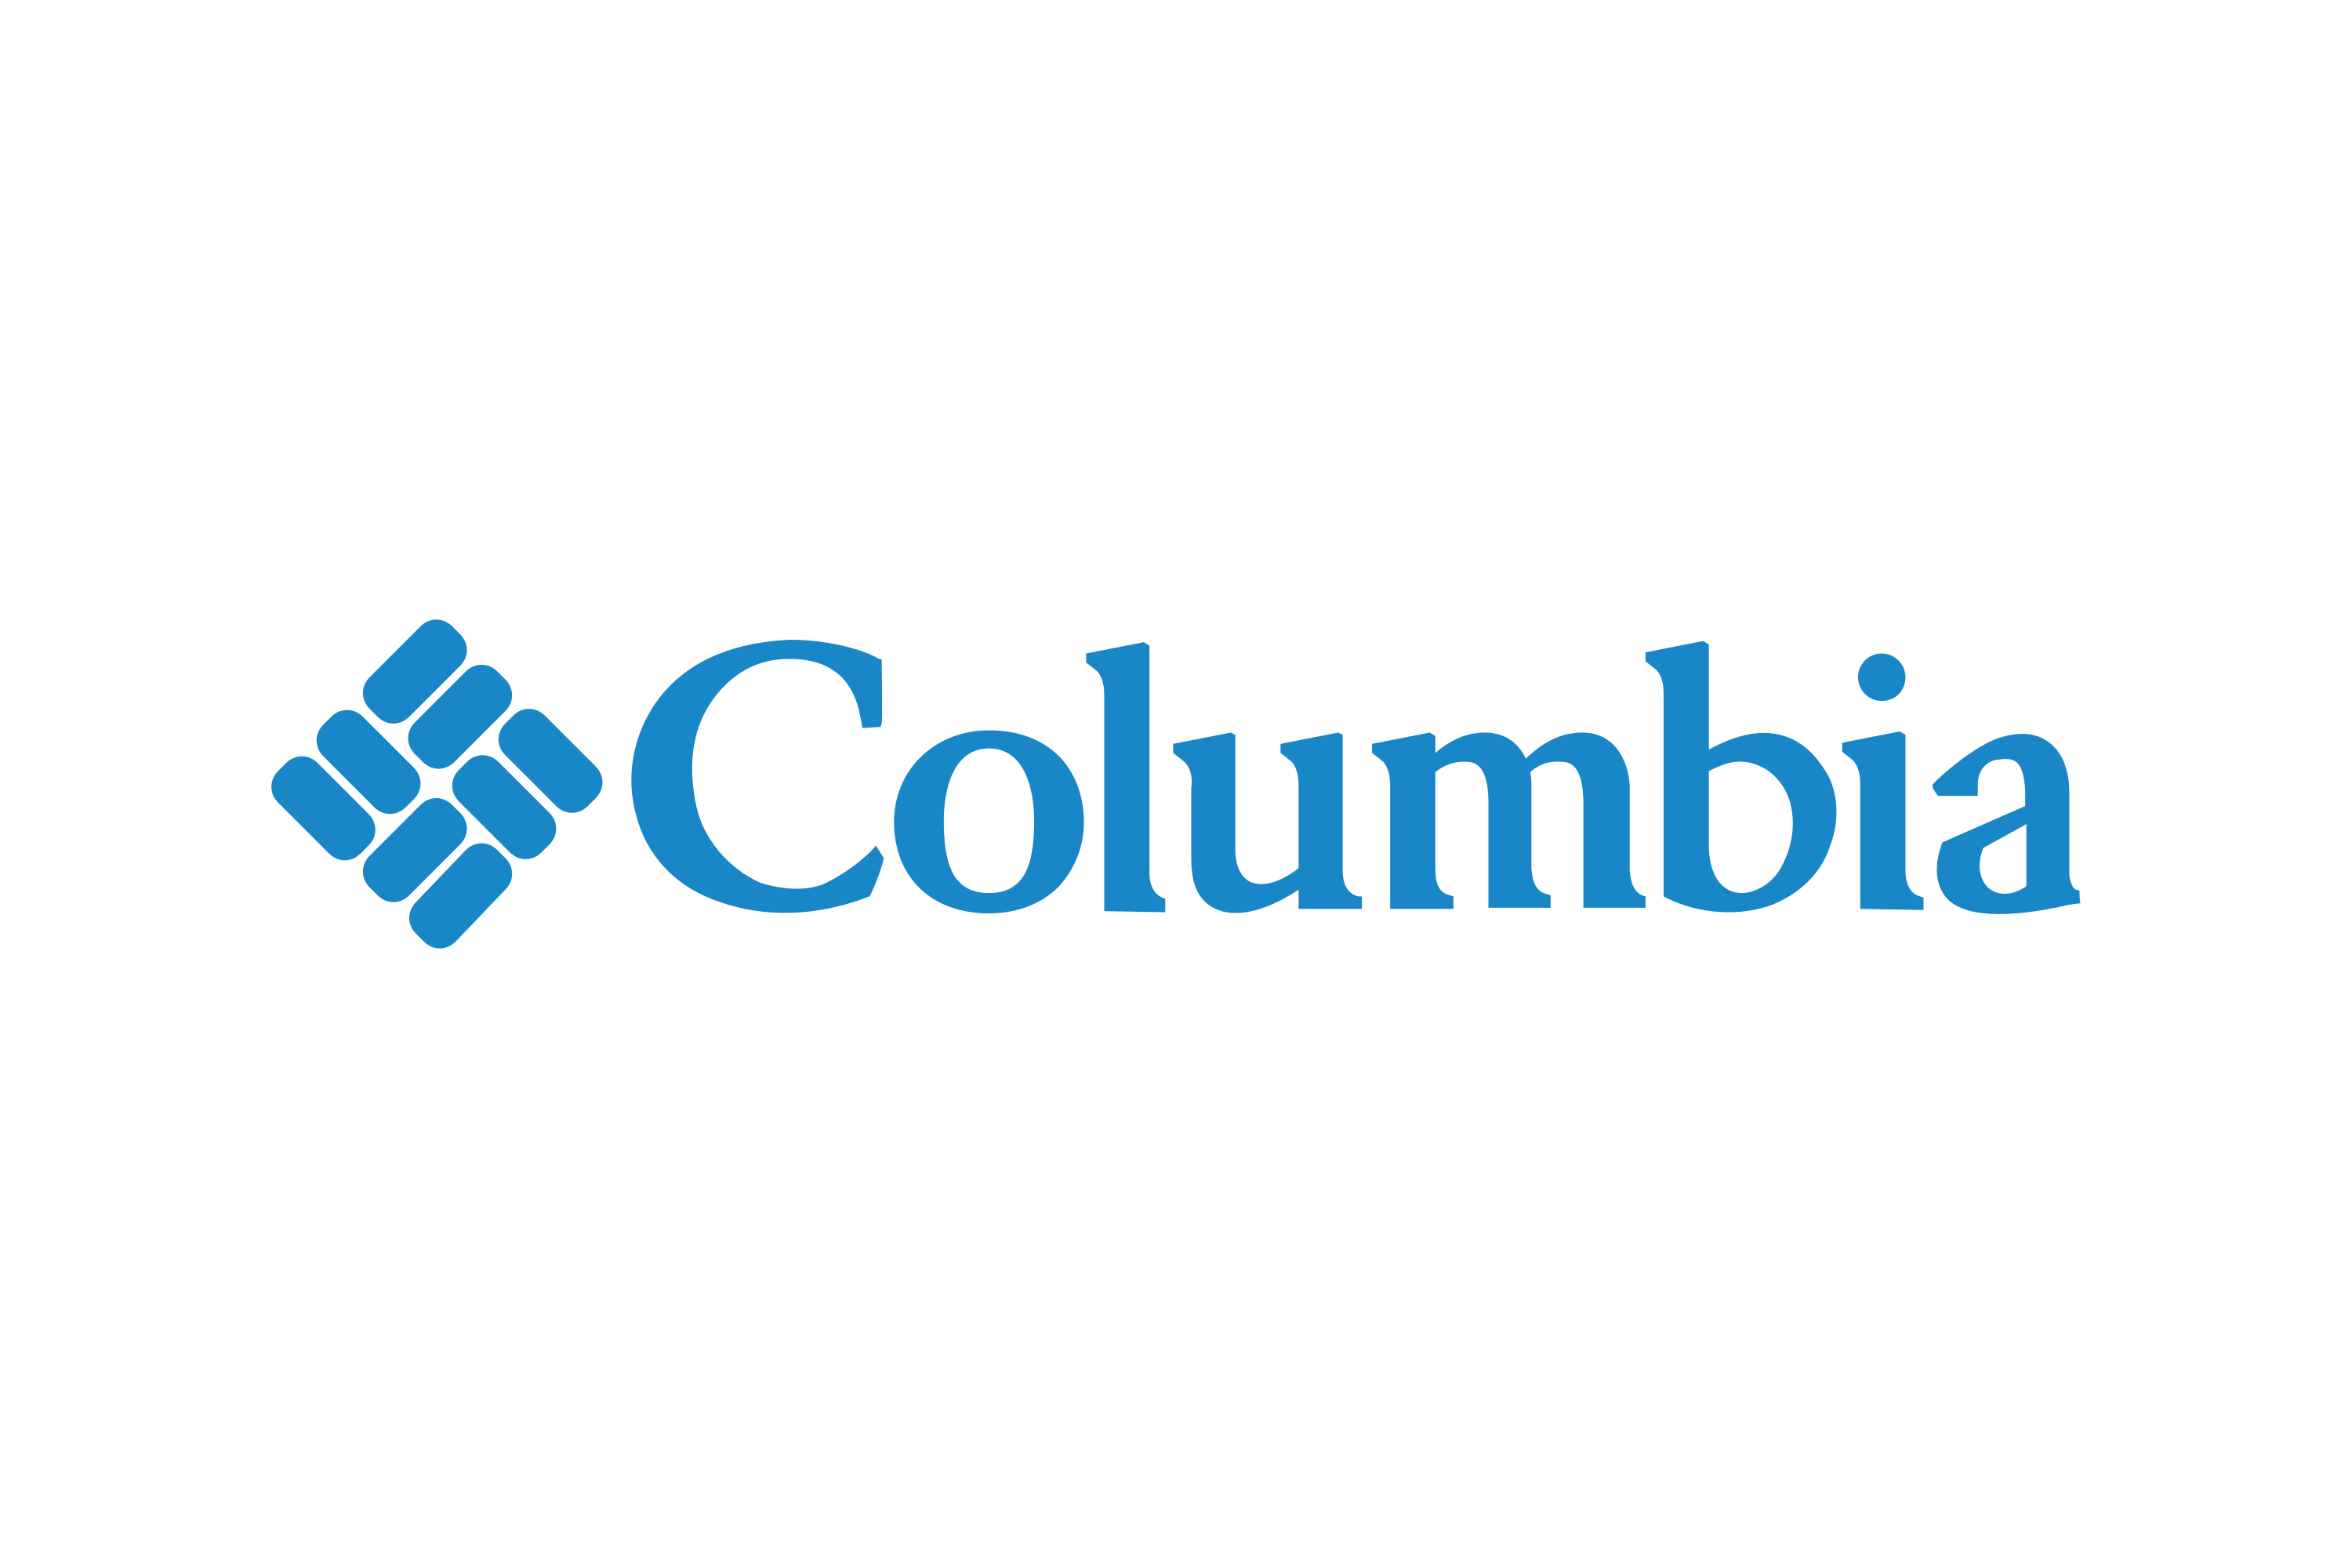 Download Download Columbia Sportswear Company Logo in SVG Vector or PNG File Format - Logo.wine